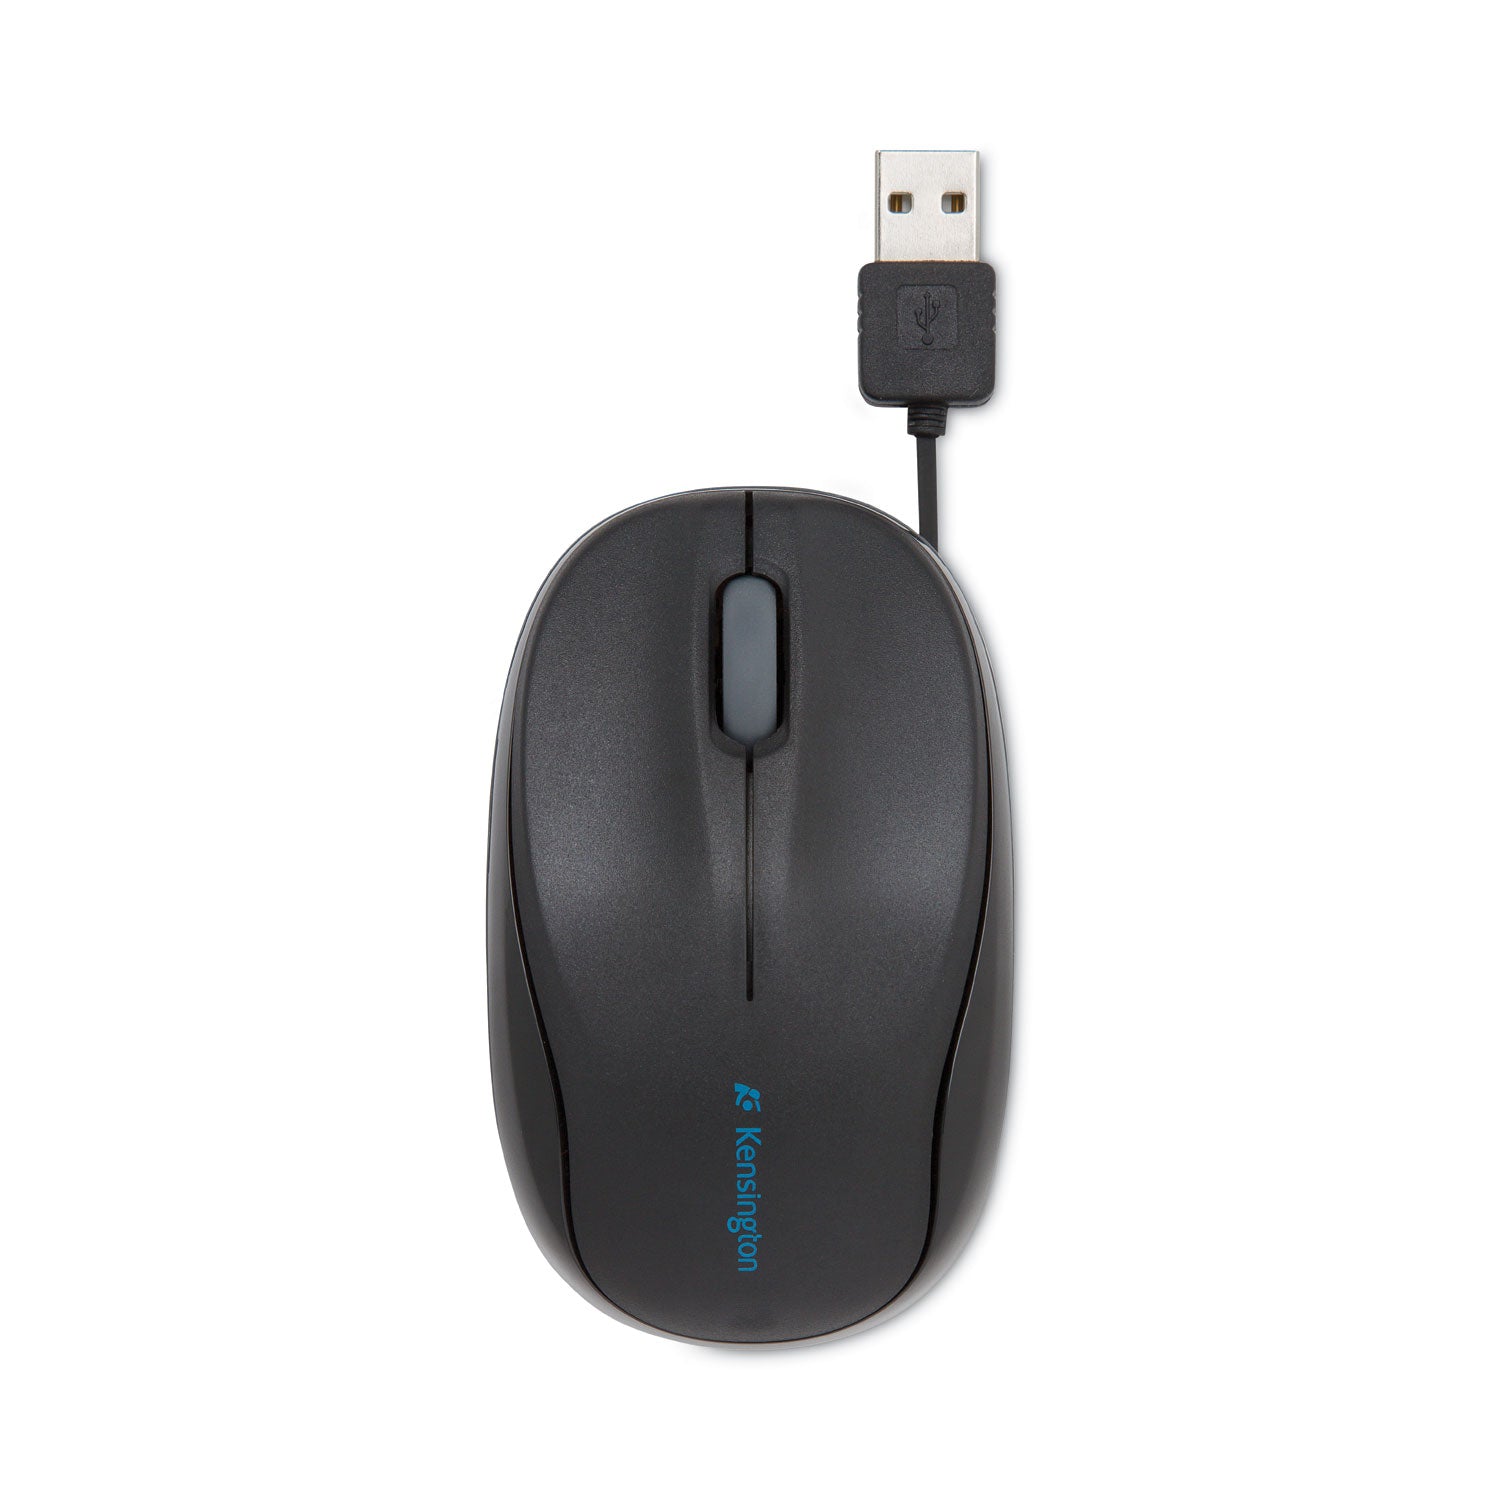 Pro Fit Optical Mouse with Retractable Cord, USB 2.0, Left/Right Hand Use, Black - 